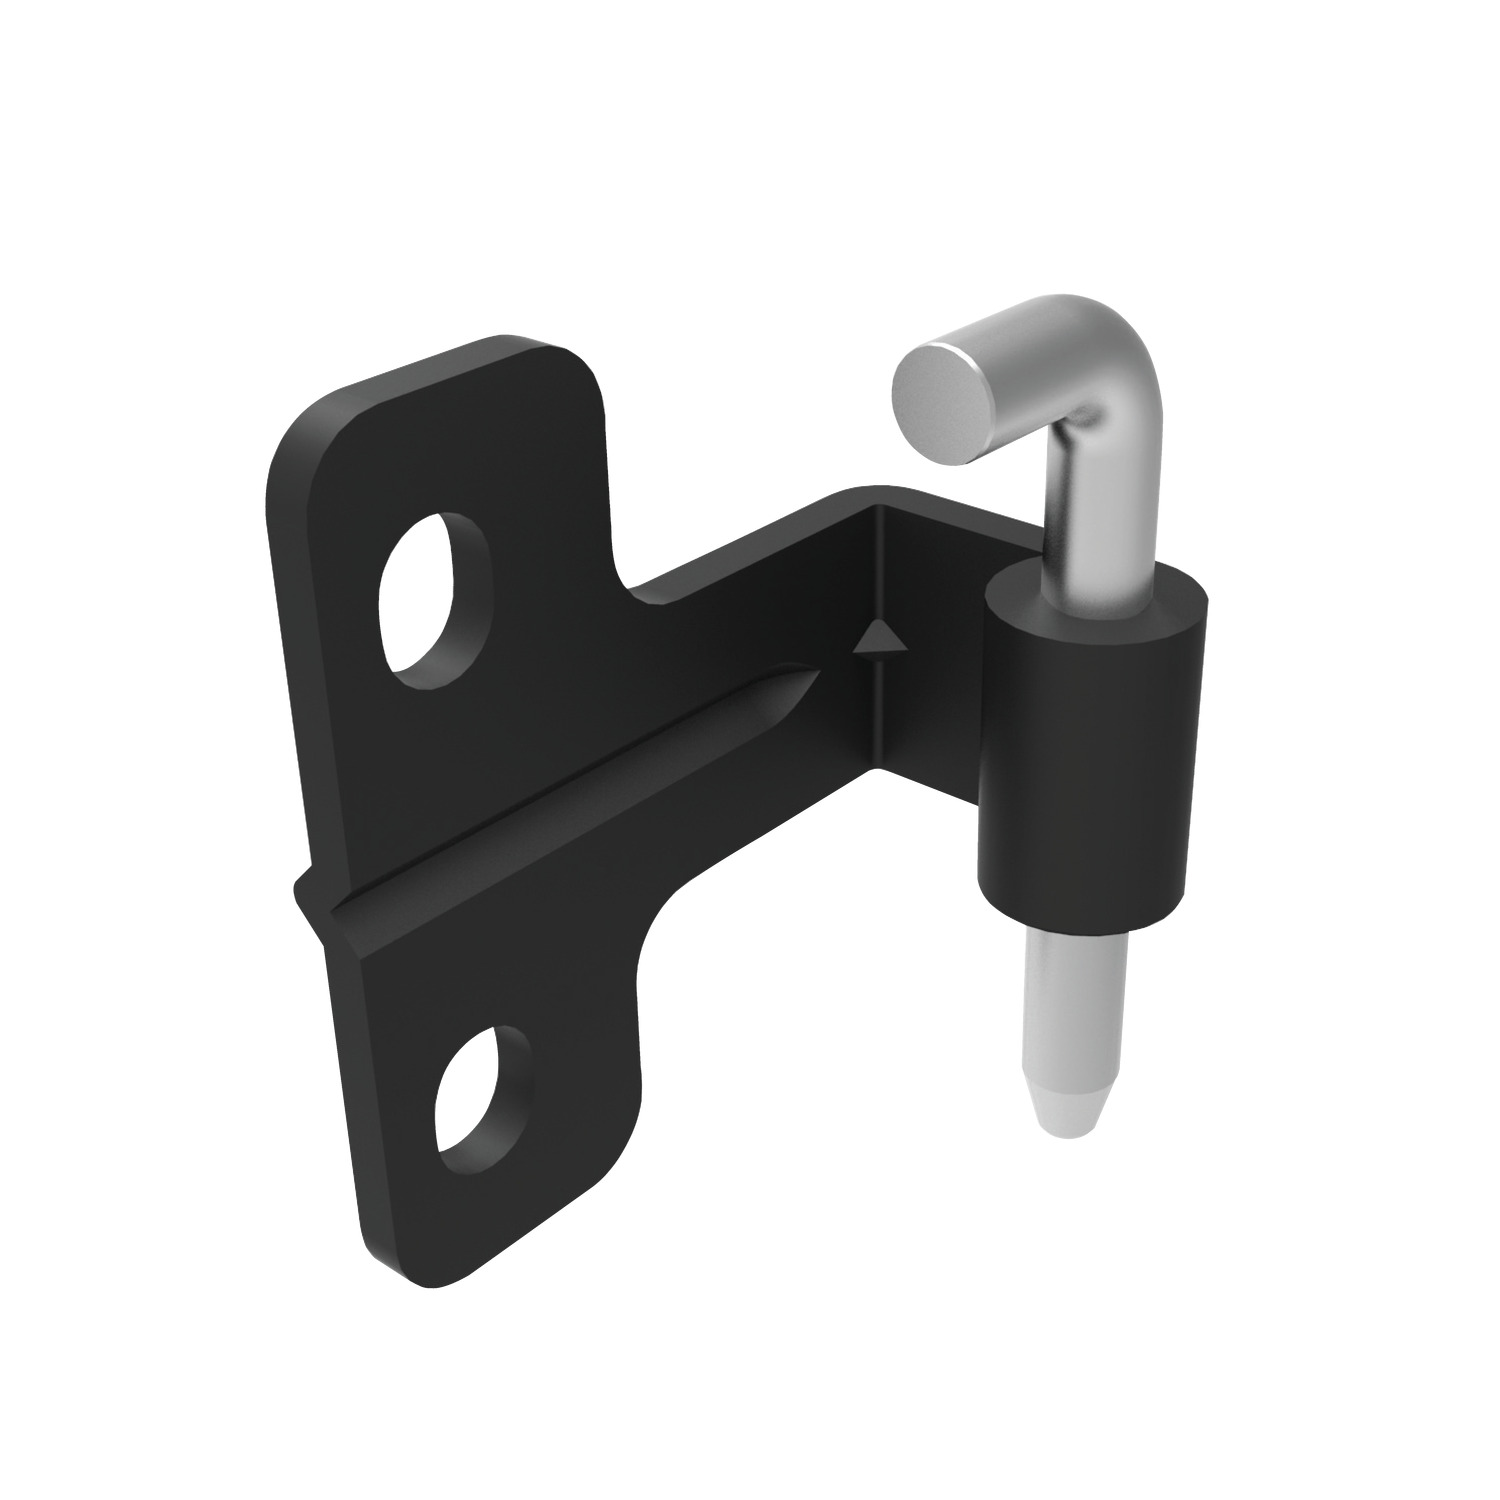 S2176 Concealed Pivot Hinges - Lift Off